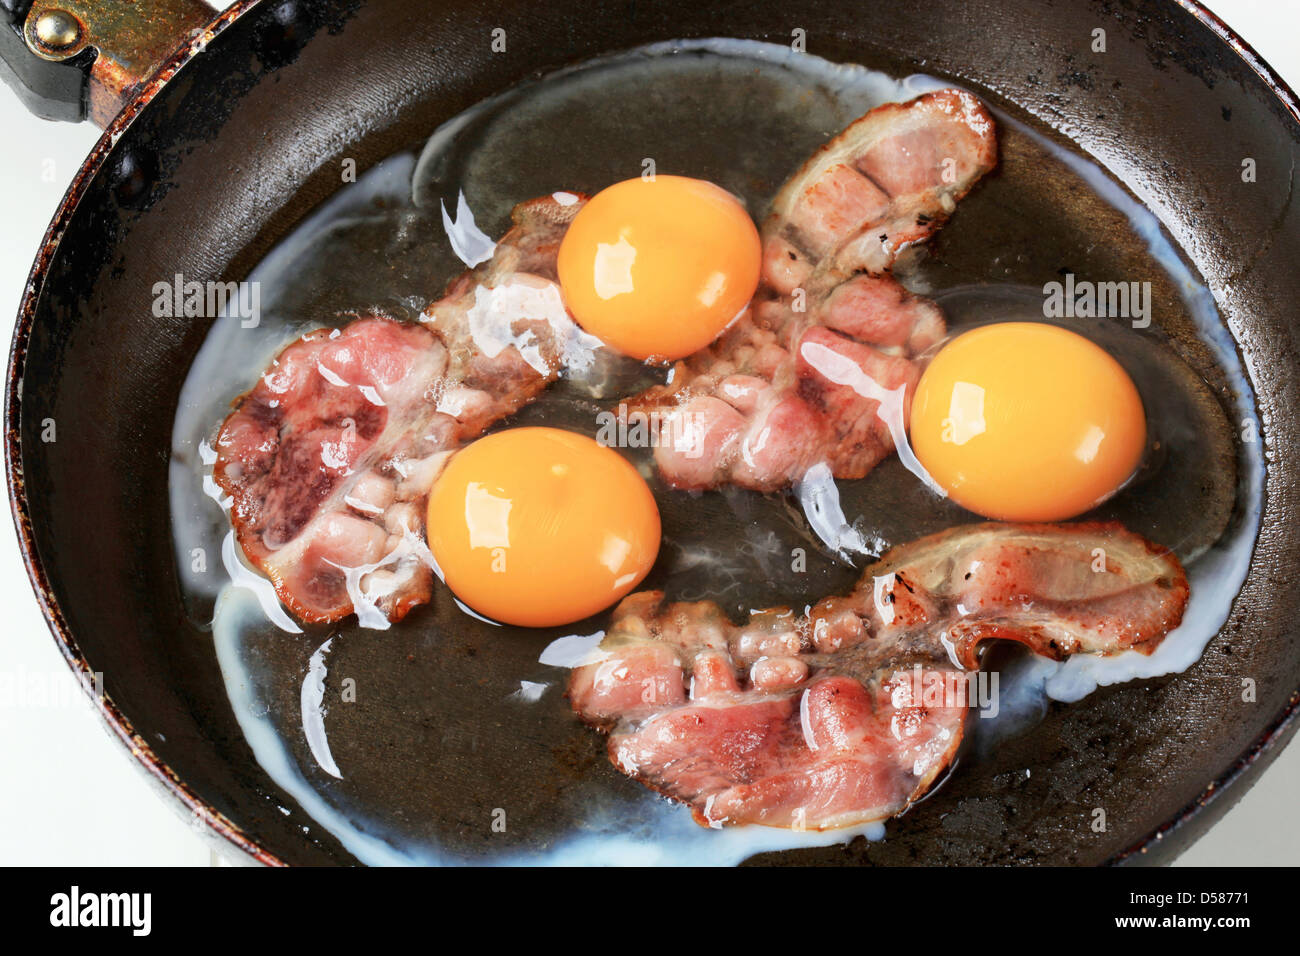 Preparing fried eggs with strips of bacon Stock Photo